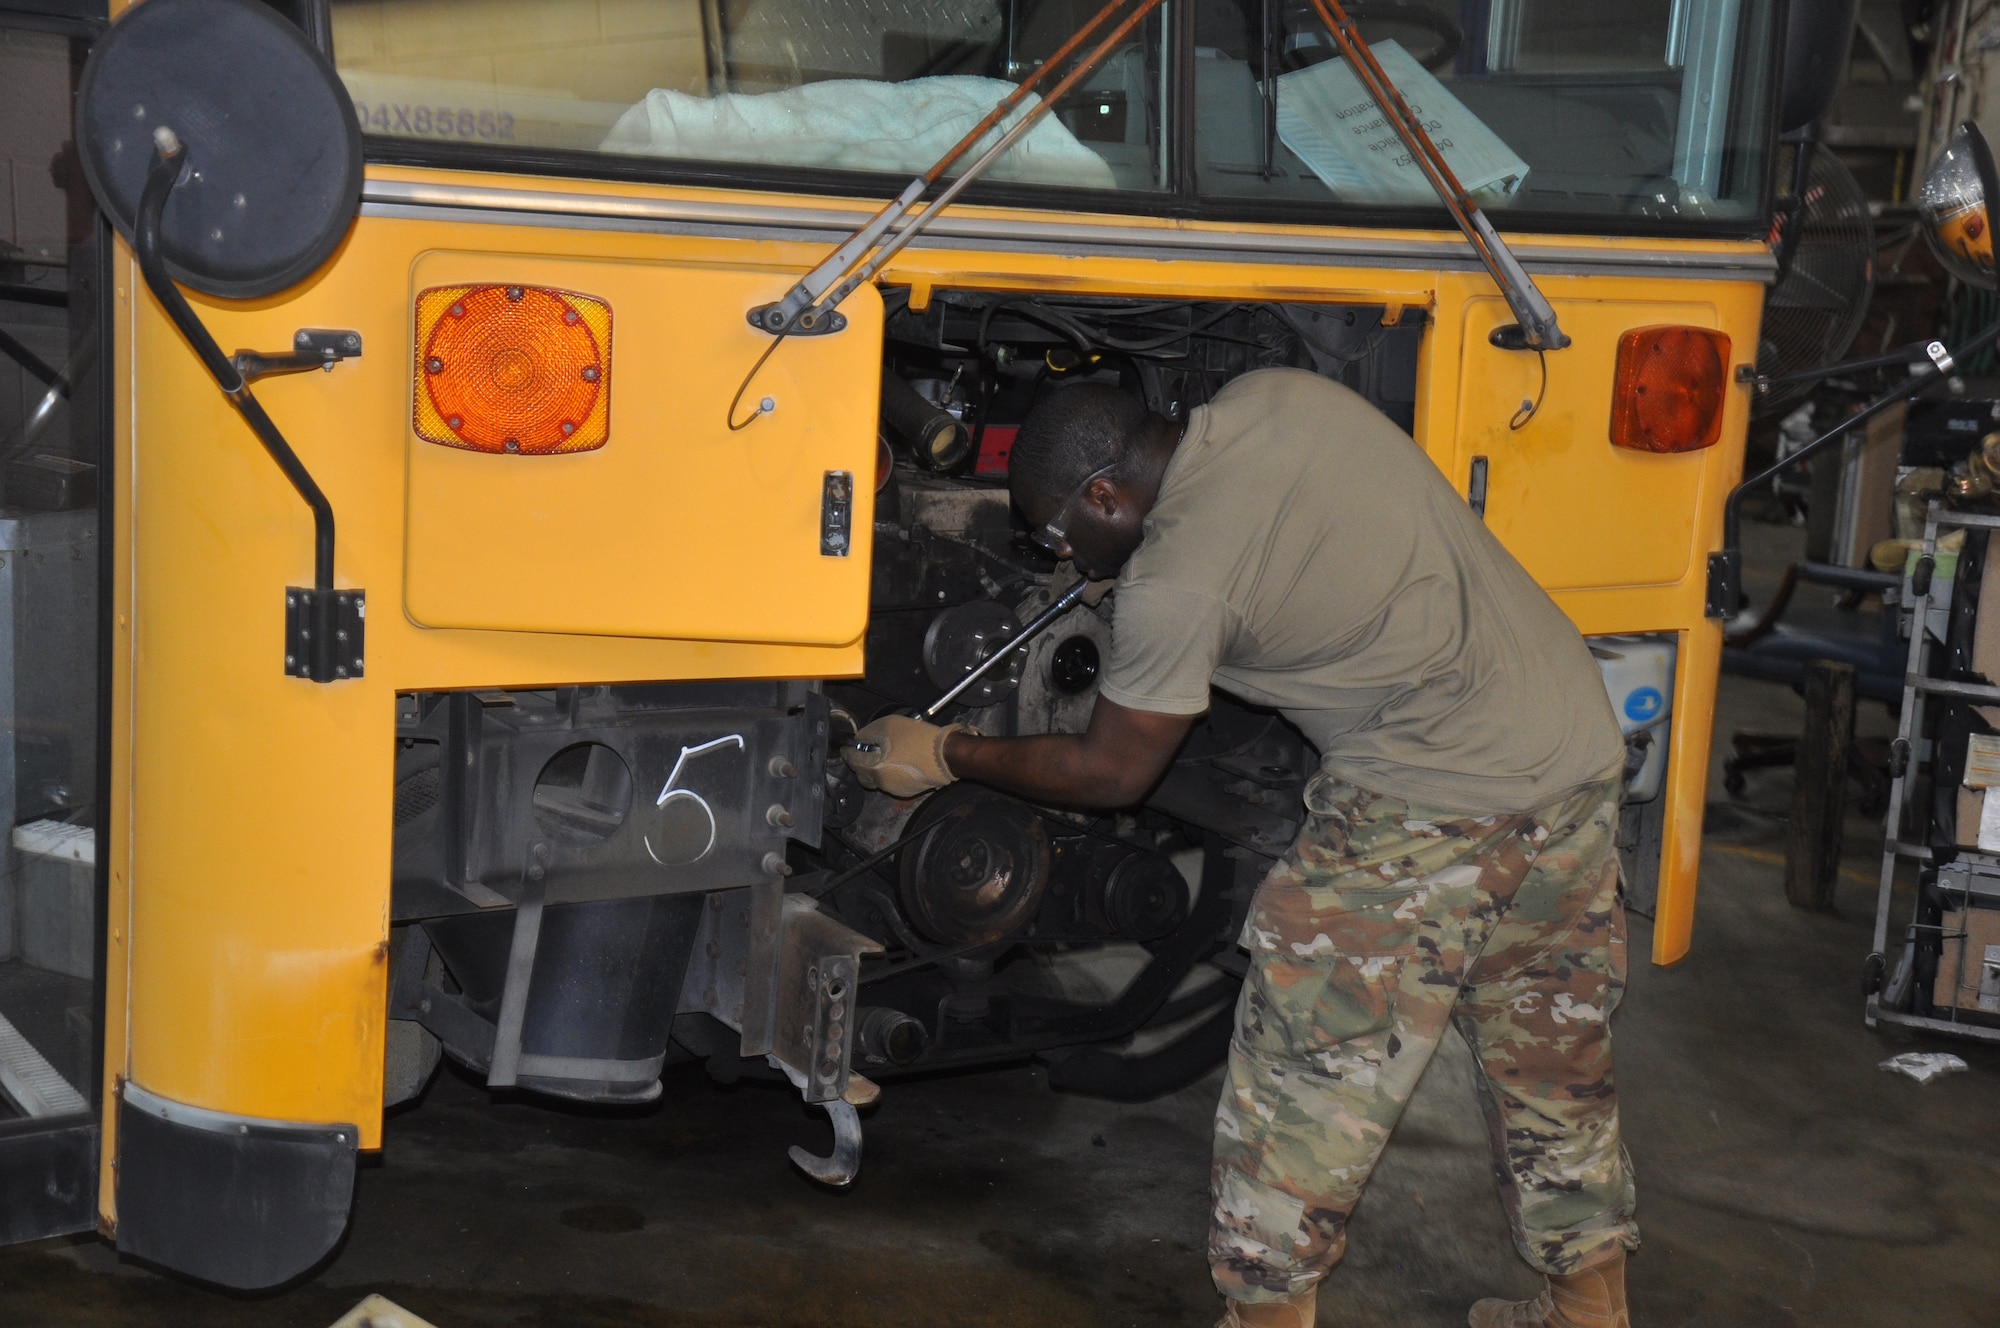 a person works on the engine of a school bus